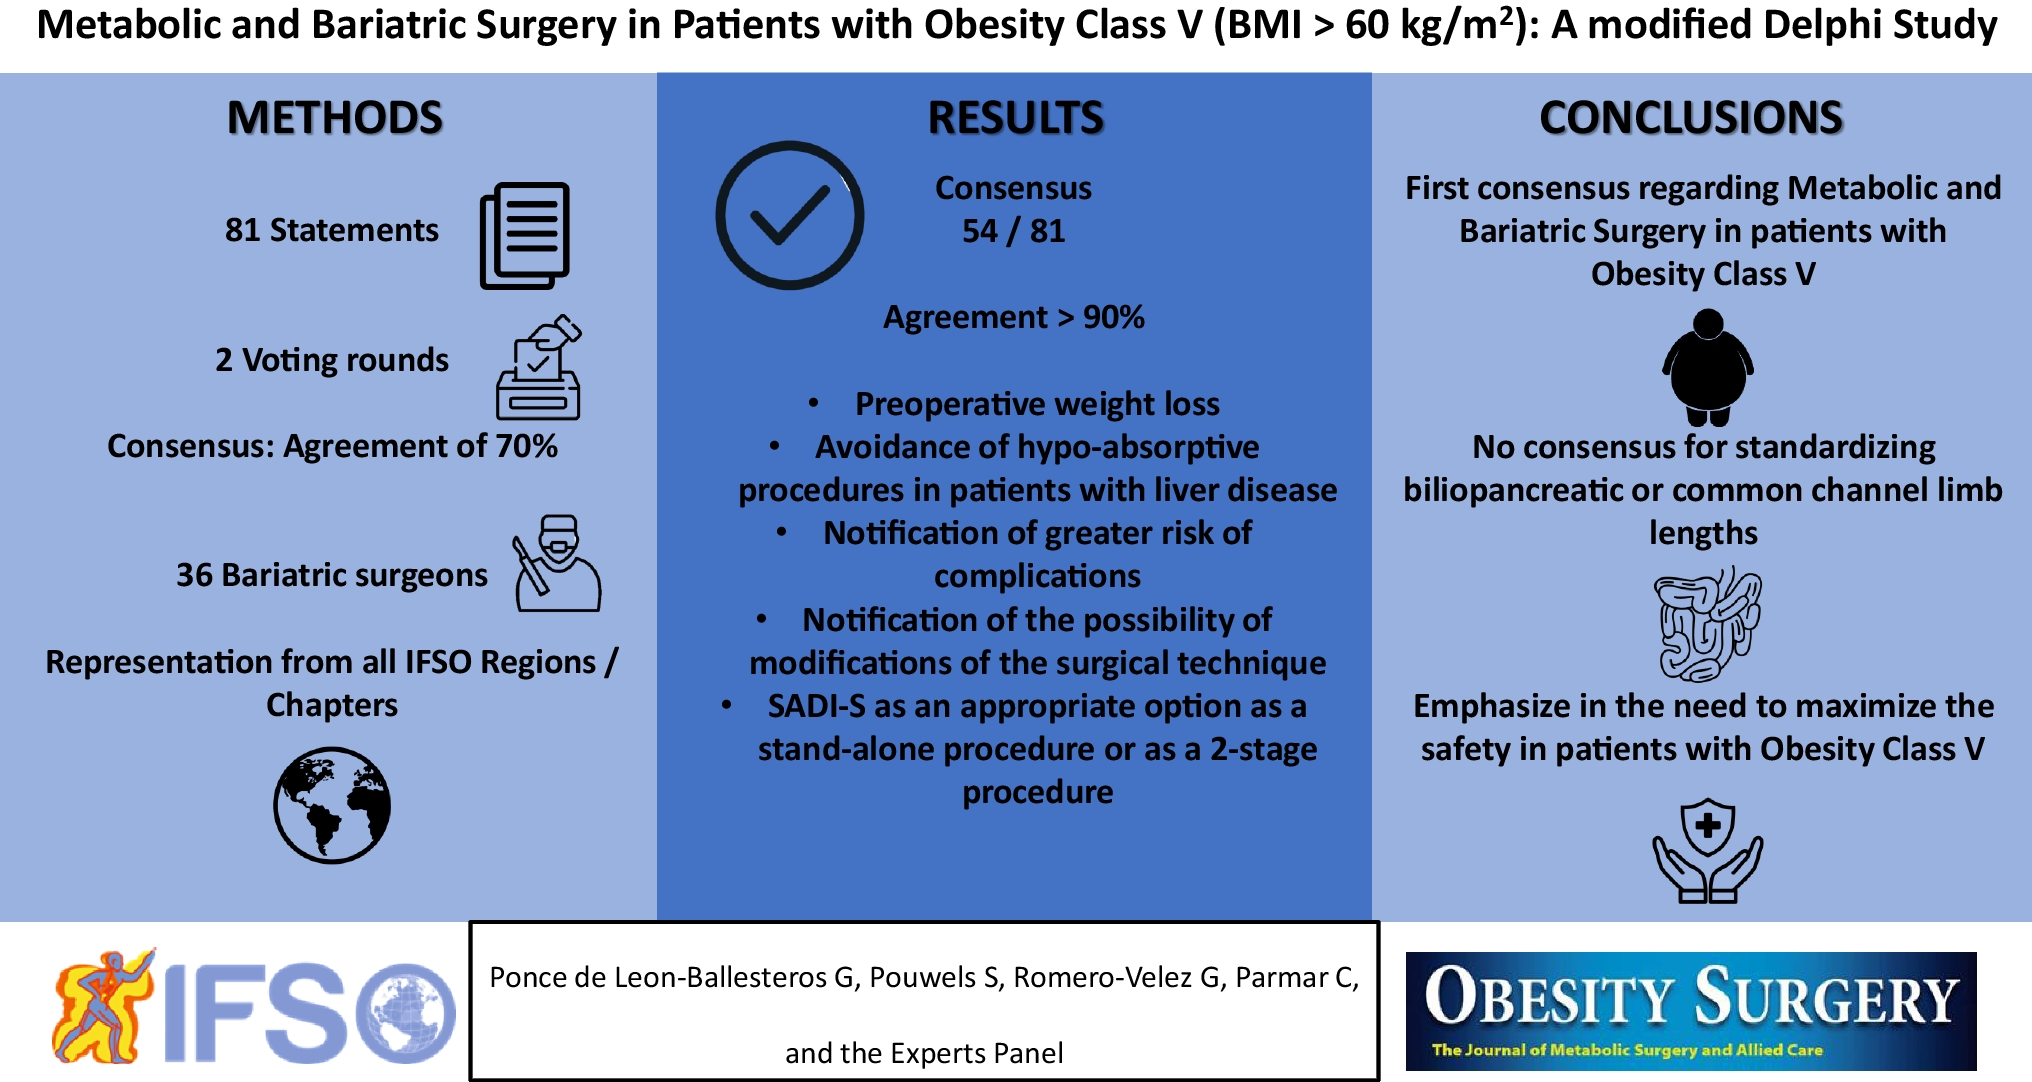 Metabolic and Bariatric Surgery in Patients with Obesity Class V (BMI > 60 kg/m2): a Modified Delphi Study